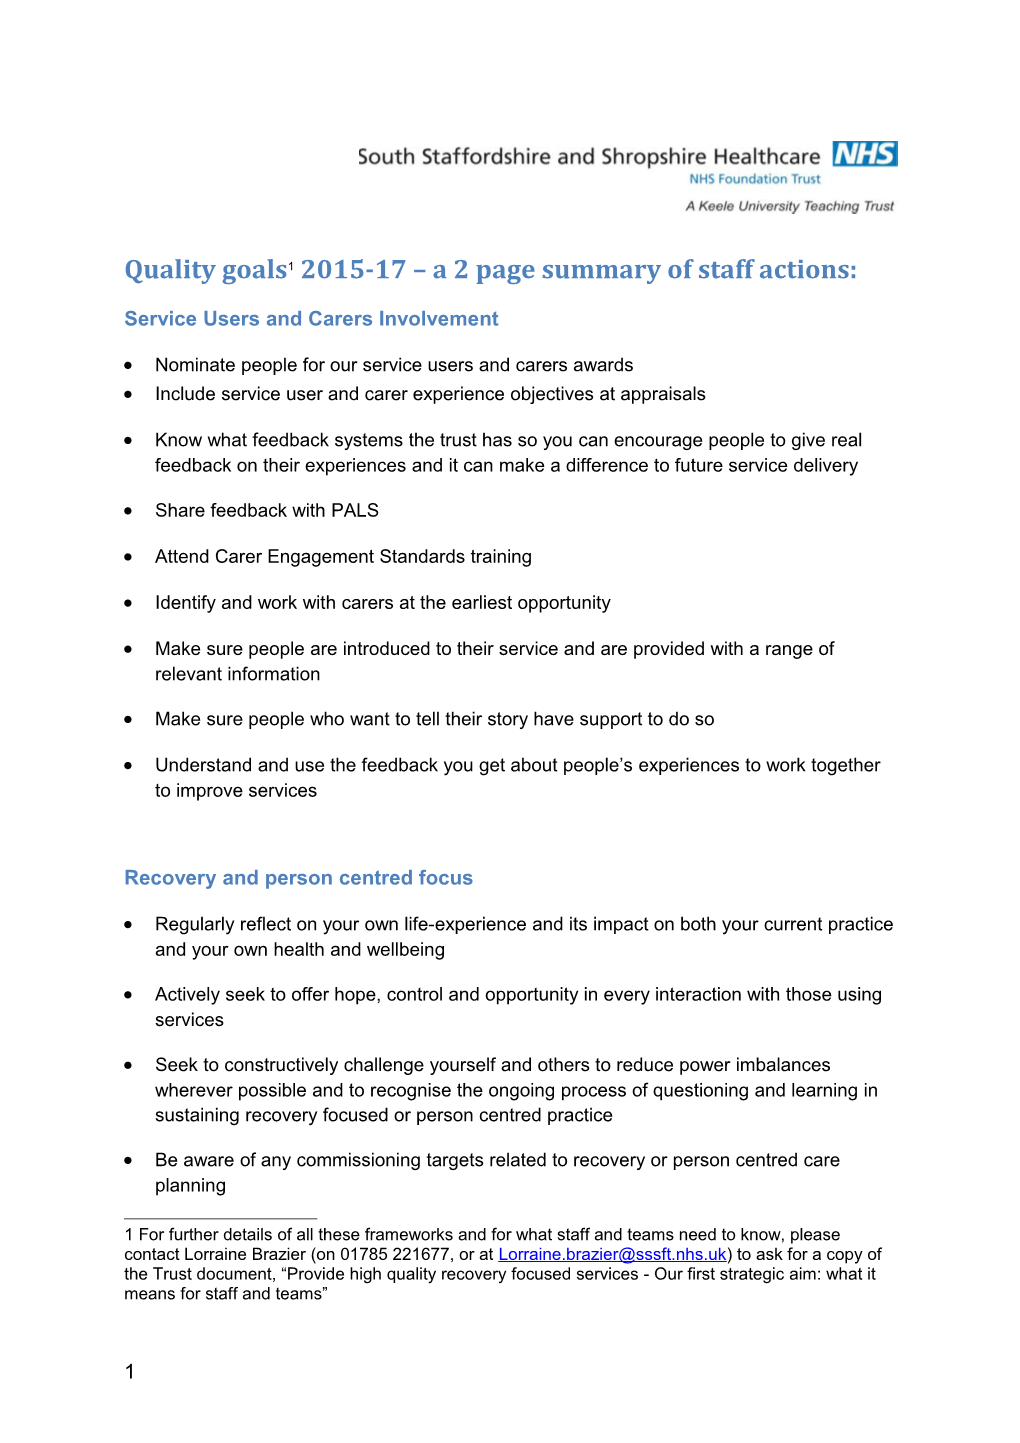 Quality Goals 1 2015-17 a 2 Page Summary of Staffactions